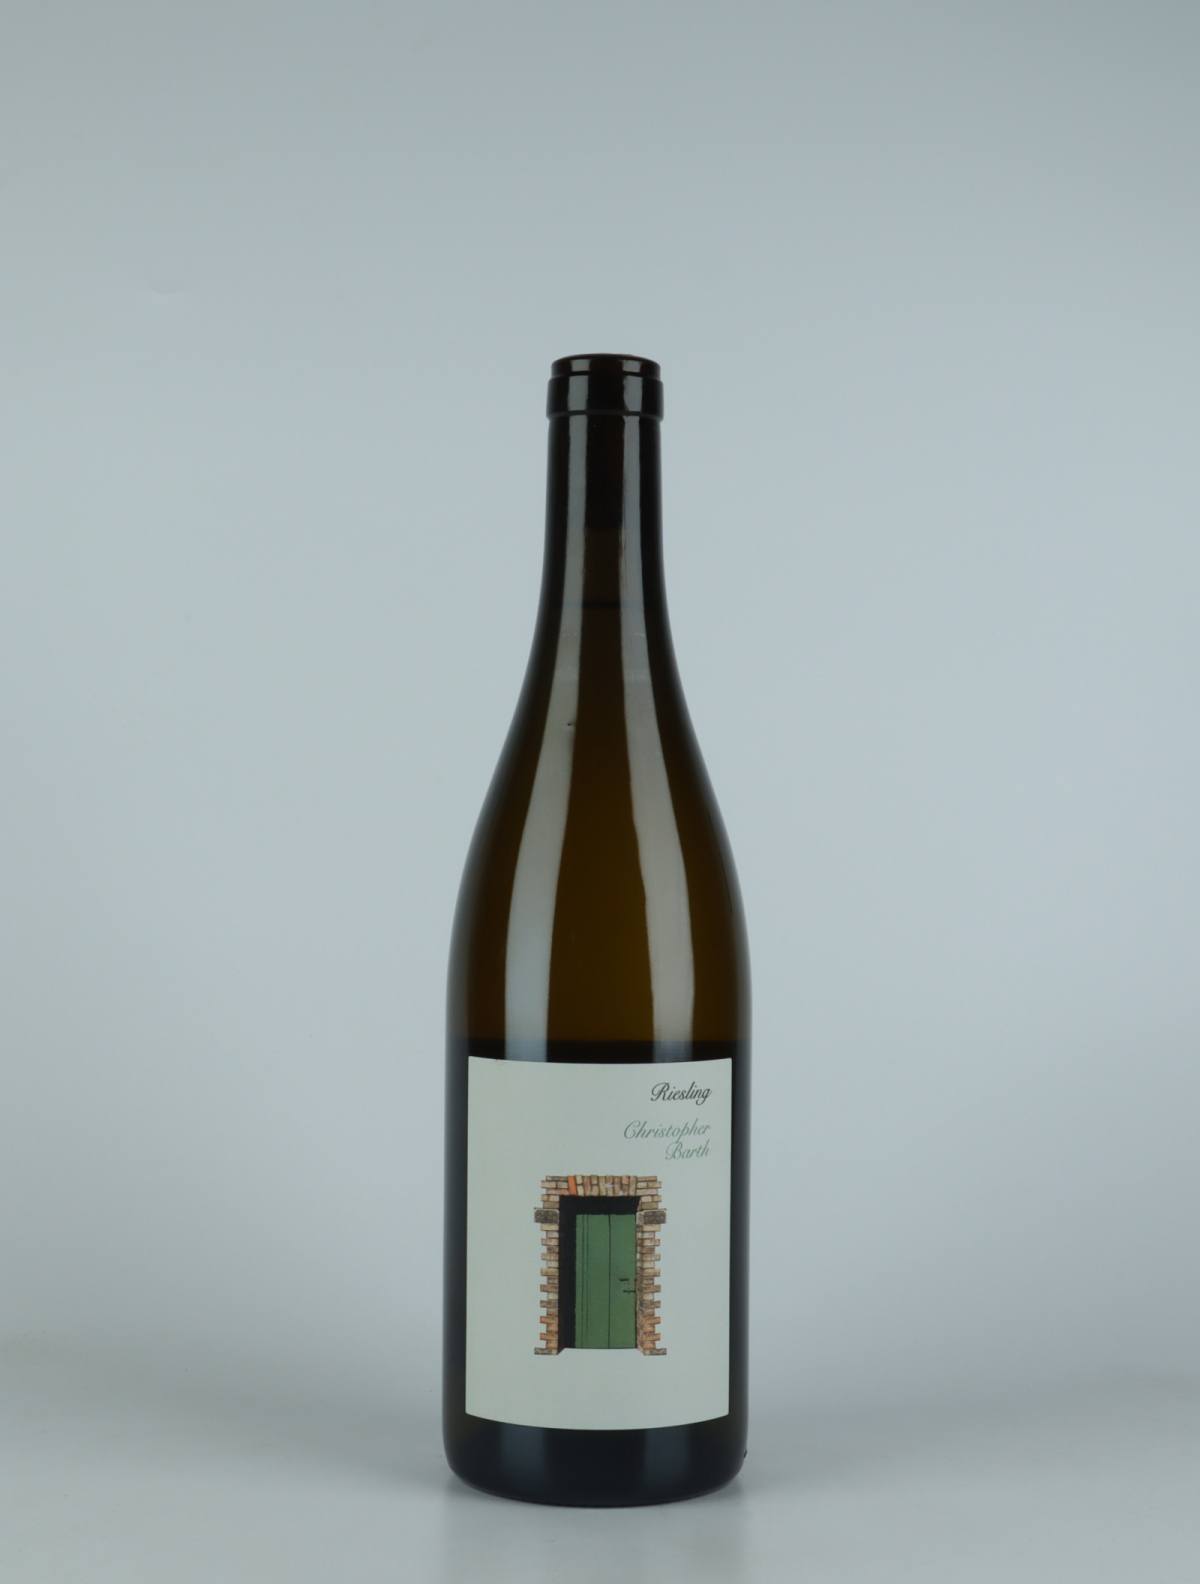 A bottle 2020 Riesling White wine from Christopher Barth, Rheinhessen in Germany